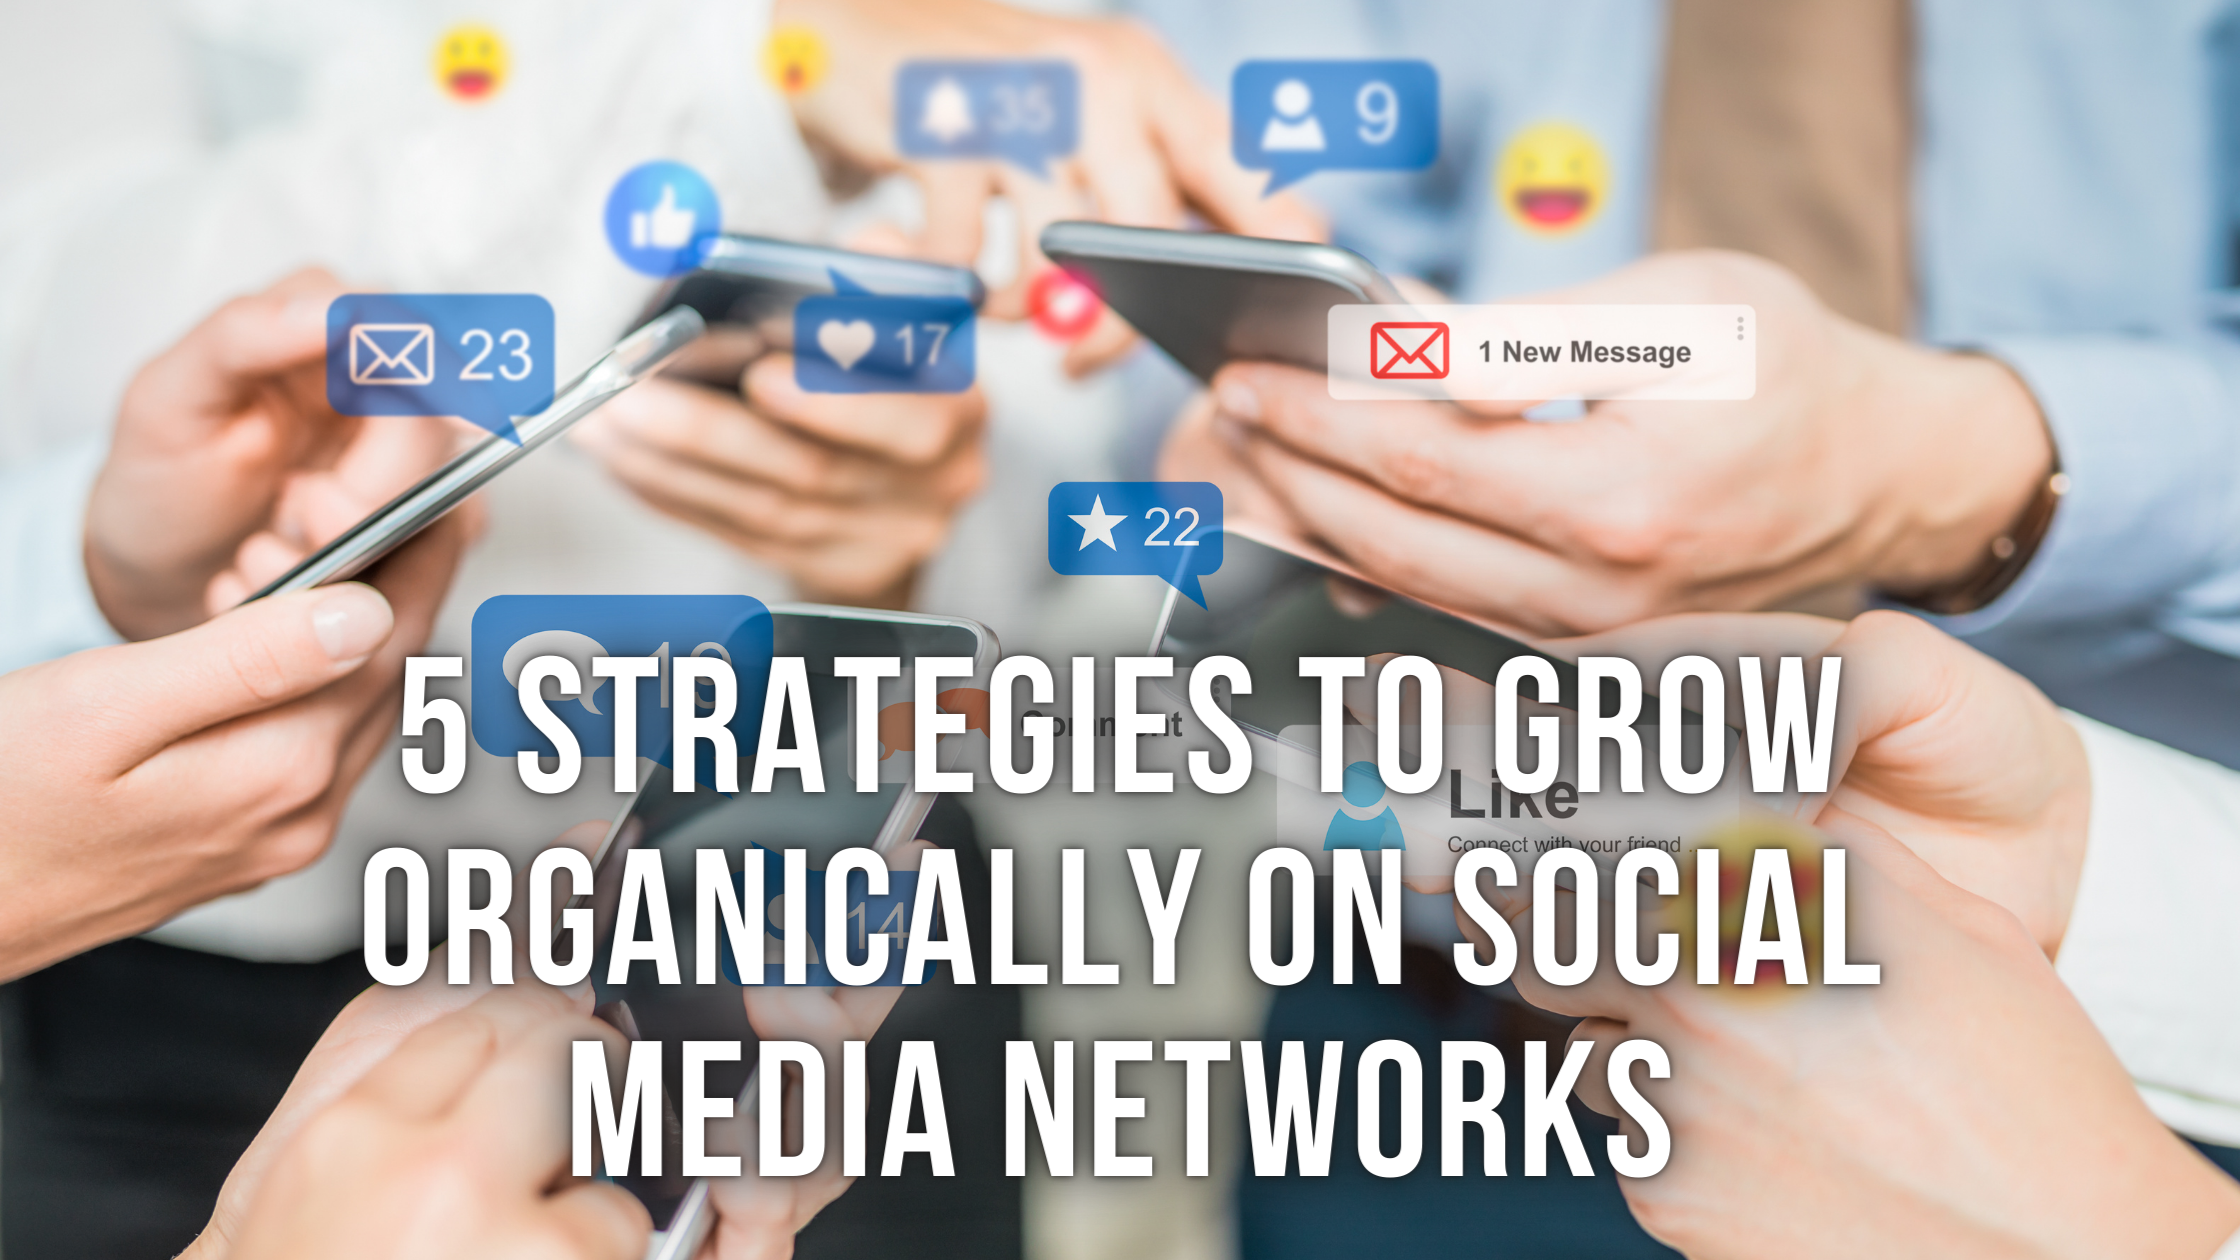 5 Strategies to Grow Organically on Social Media Networks